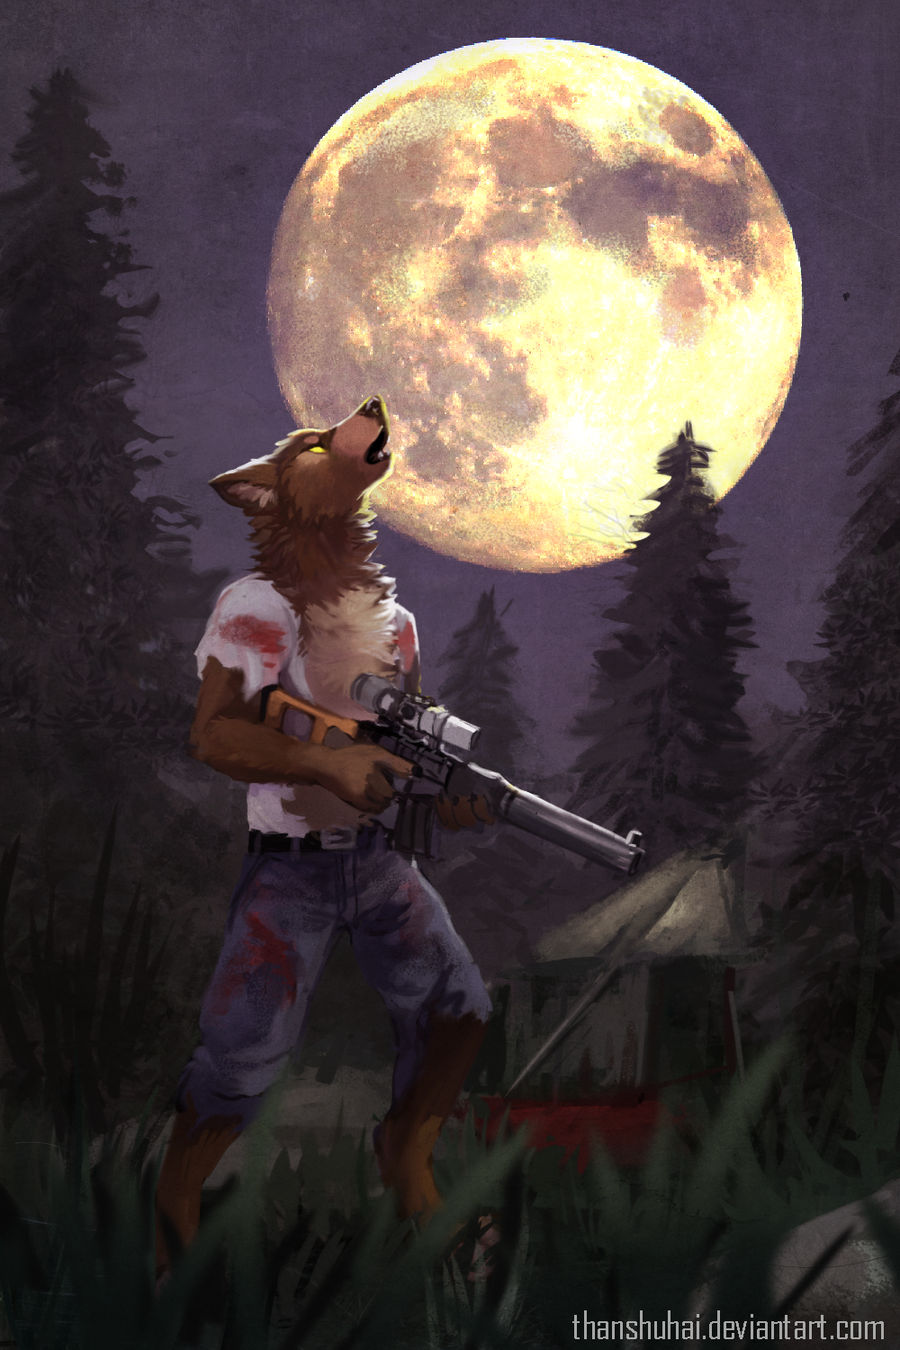 Howling with Rifles